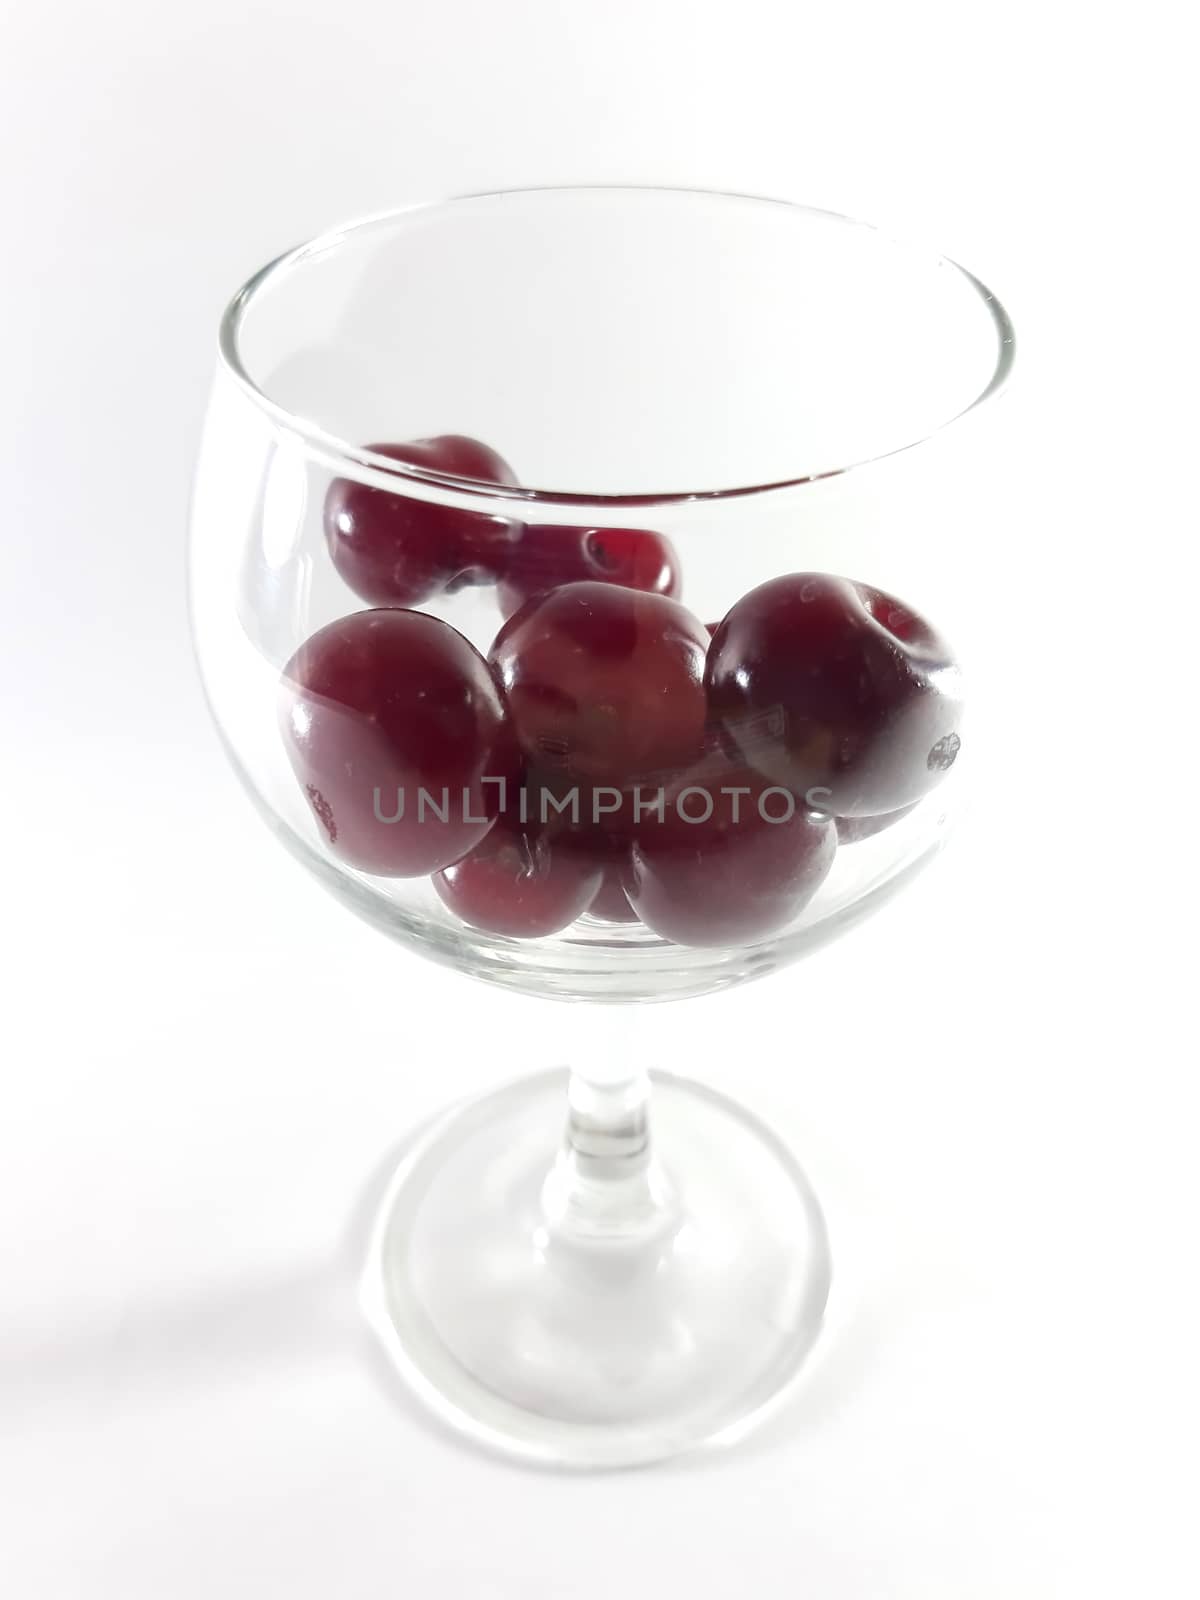 Cherry fruit in transparent wineglass. Cherry for a snack. Photo isolated.